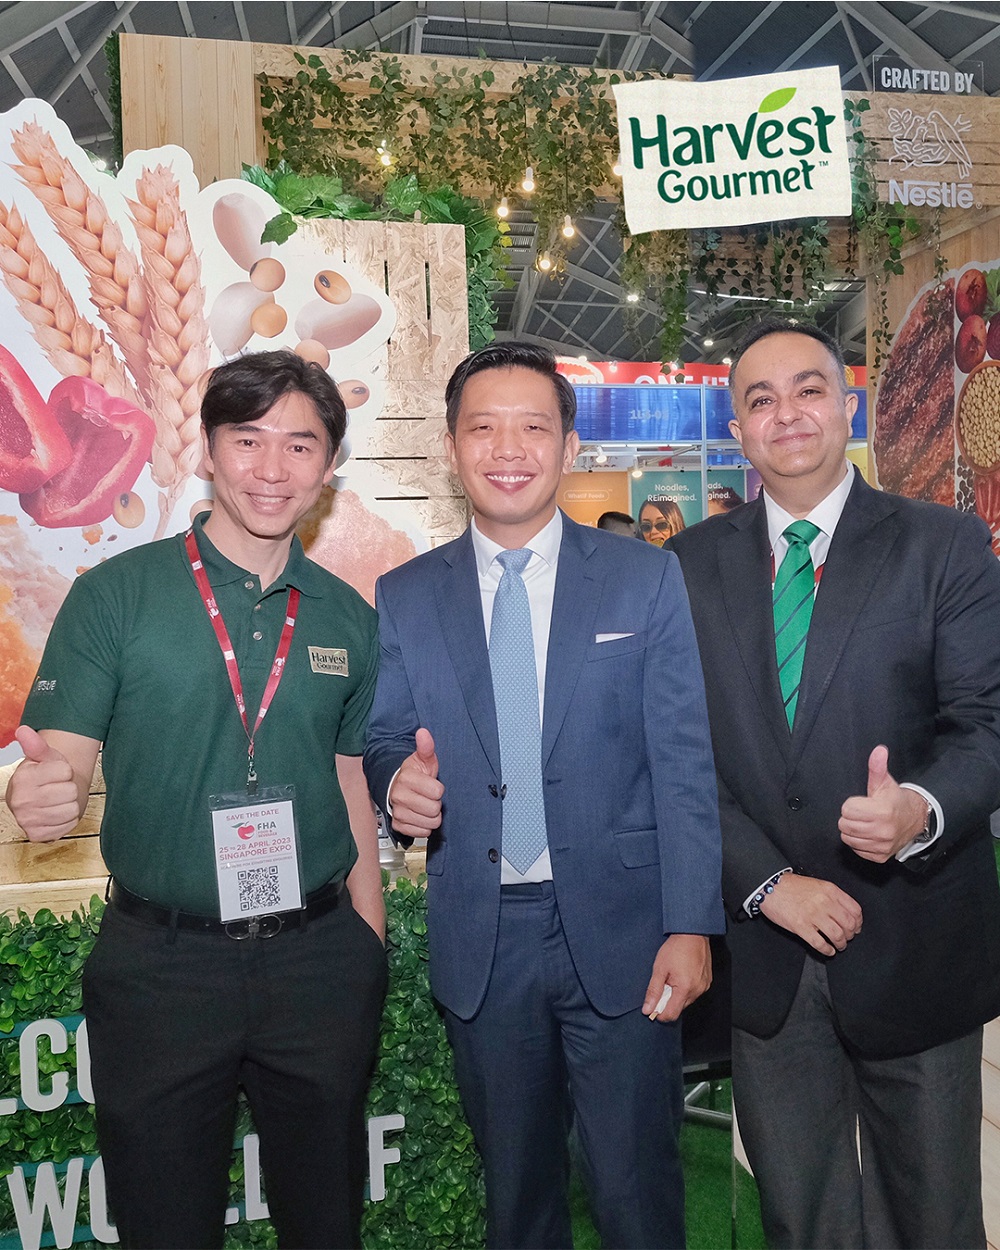 Mr Alvin Tan, Minister of State for Trade and Industry & Culture, Community and Youth (centre), flanked by Mr Nikhil Chand, Managing Director of Nestlé Singapore (right) and Mr Chow Phee Chat, Regional Head – Marketing, Communication and Innovation Nestlé Malaysia & Singapore (left).